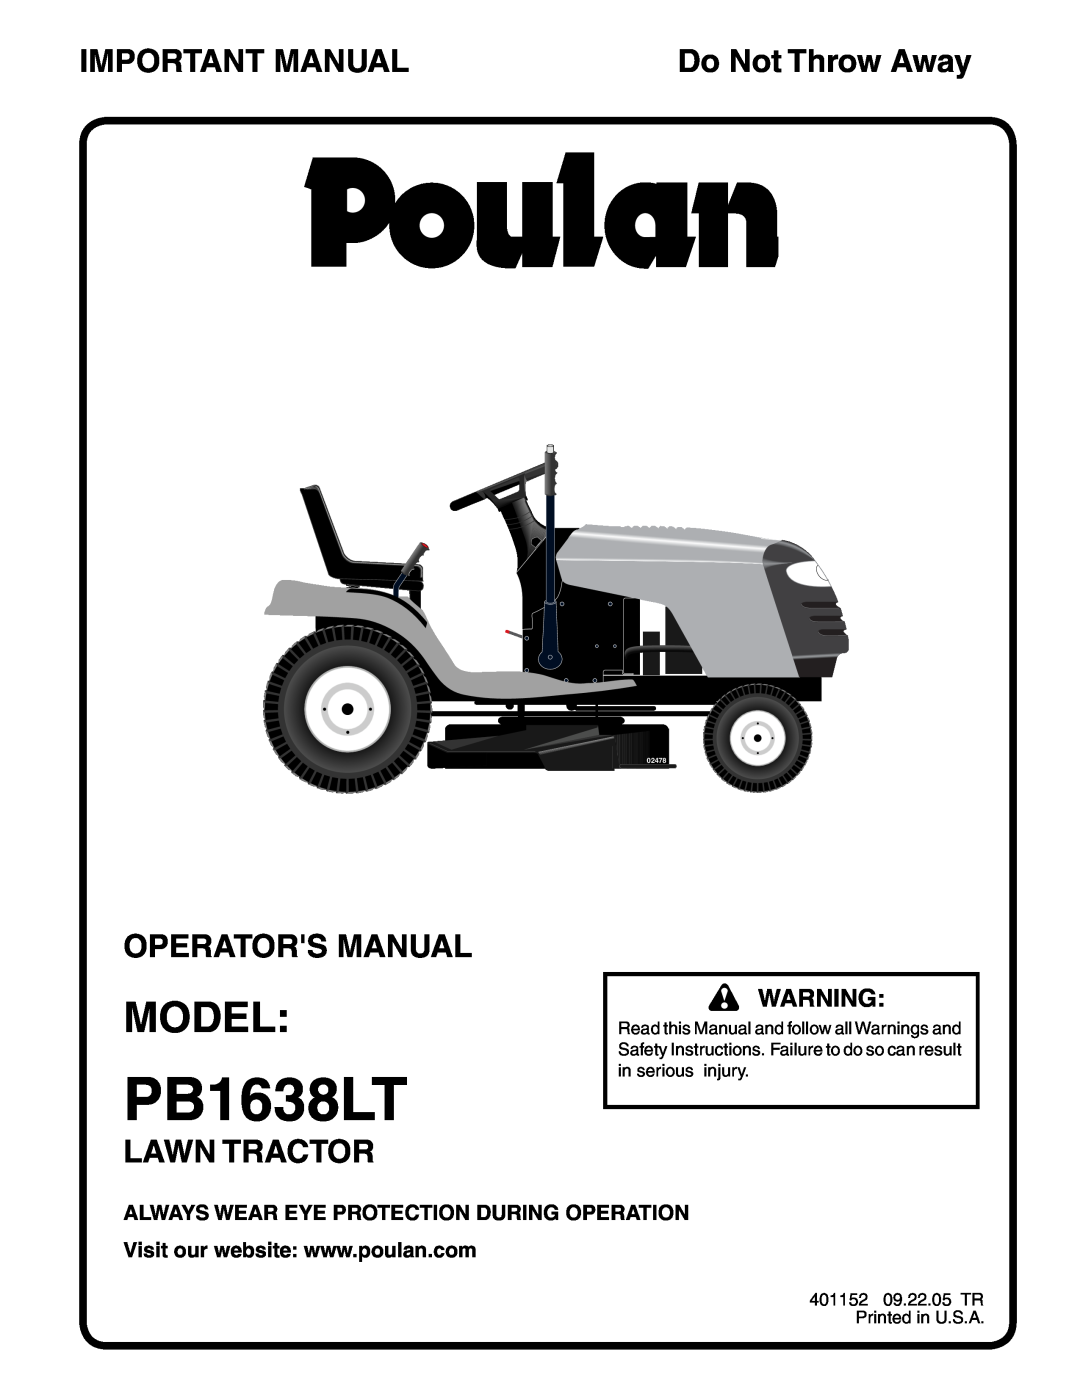 Poulan 401152 manual Model, Important Manual, Operators Manual, Lawn Tractor, Always Wear Eye Protection During Operation 